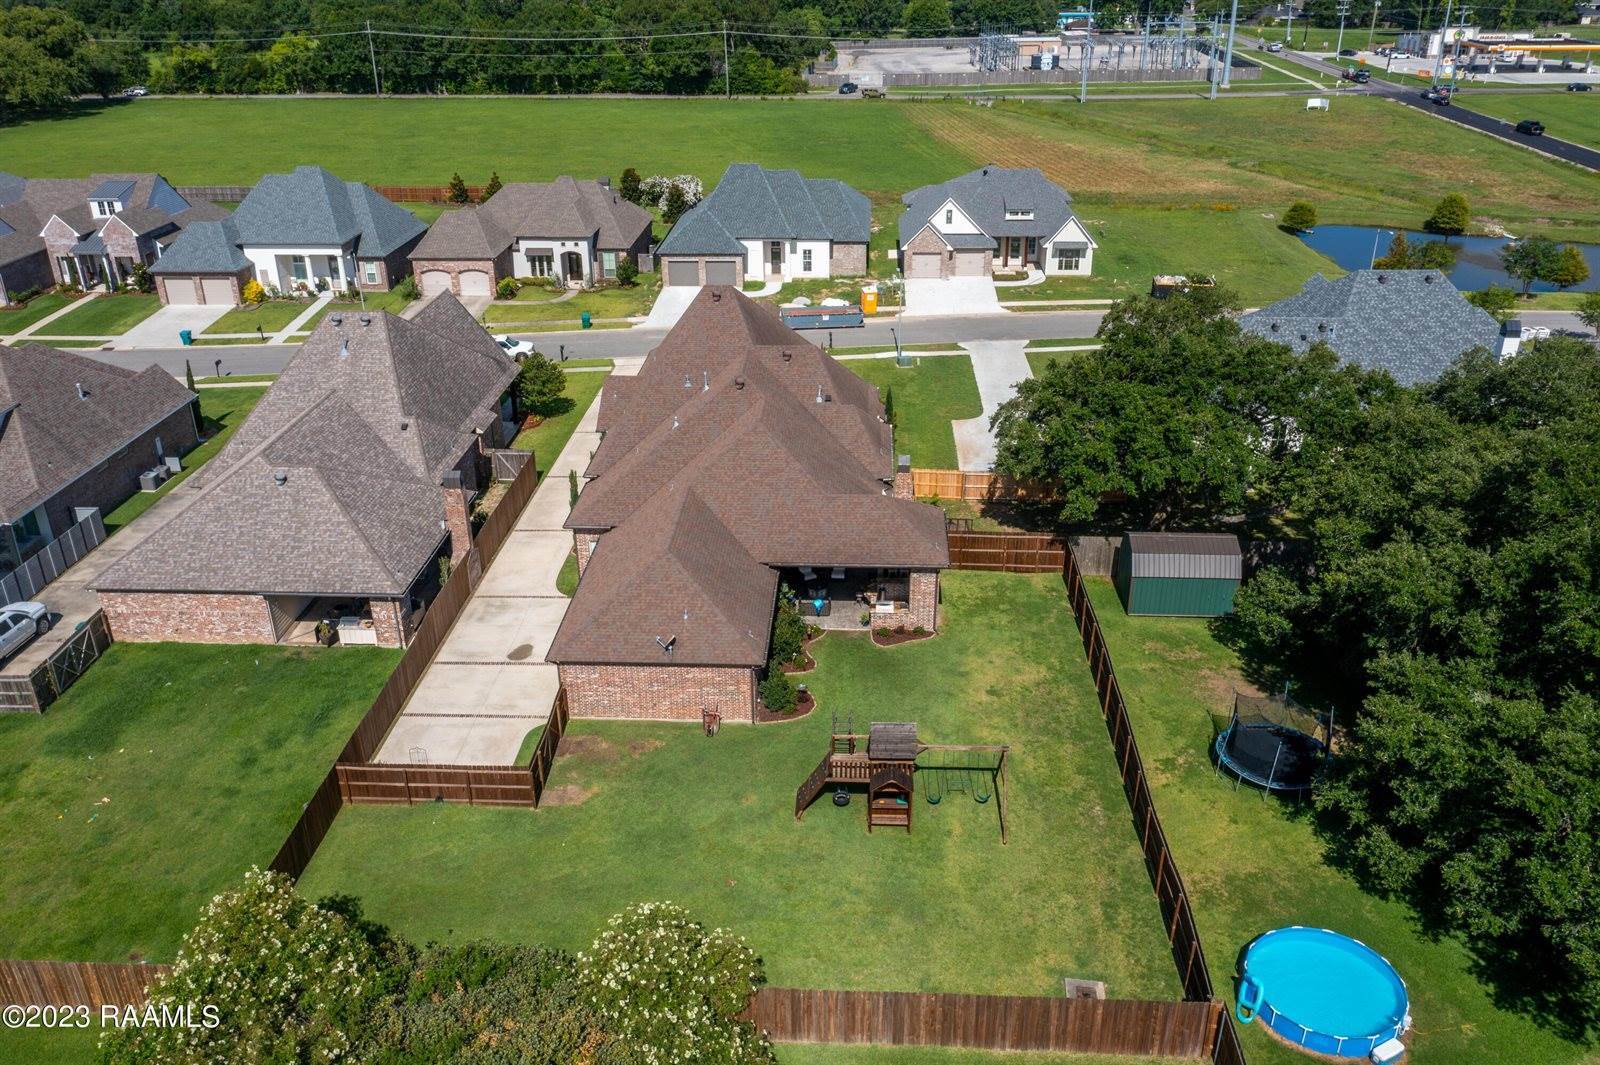 109 Carriage Lakes Drive, Youngsville, LA 70592